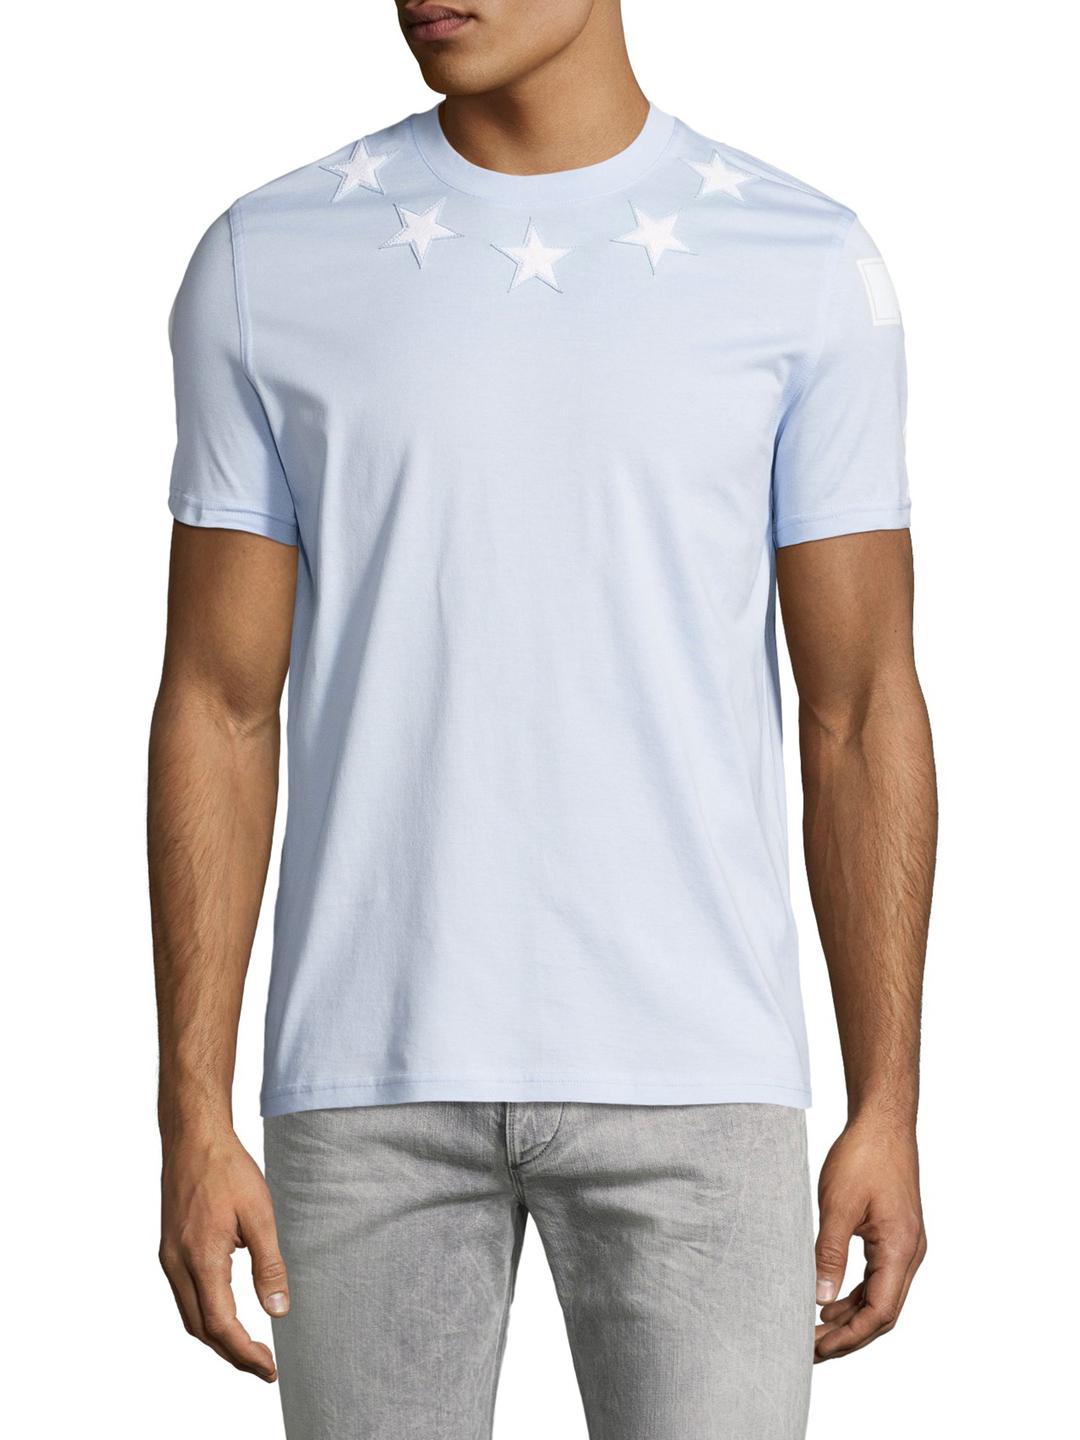 Givenchy Star Cotton T-shirt in Light 